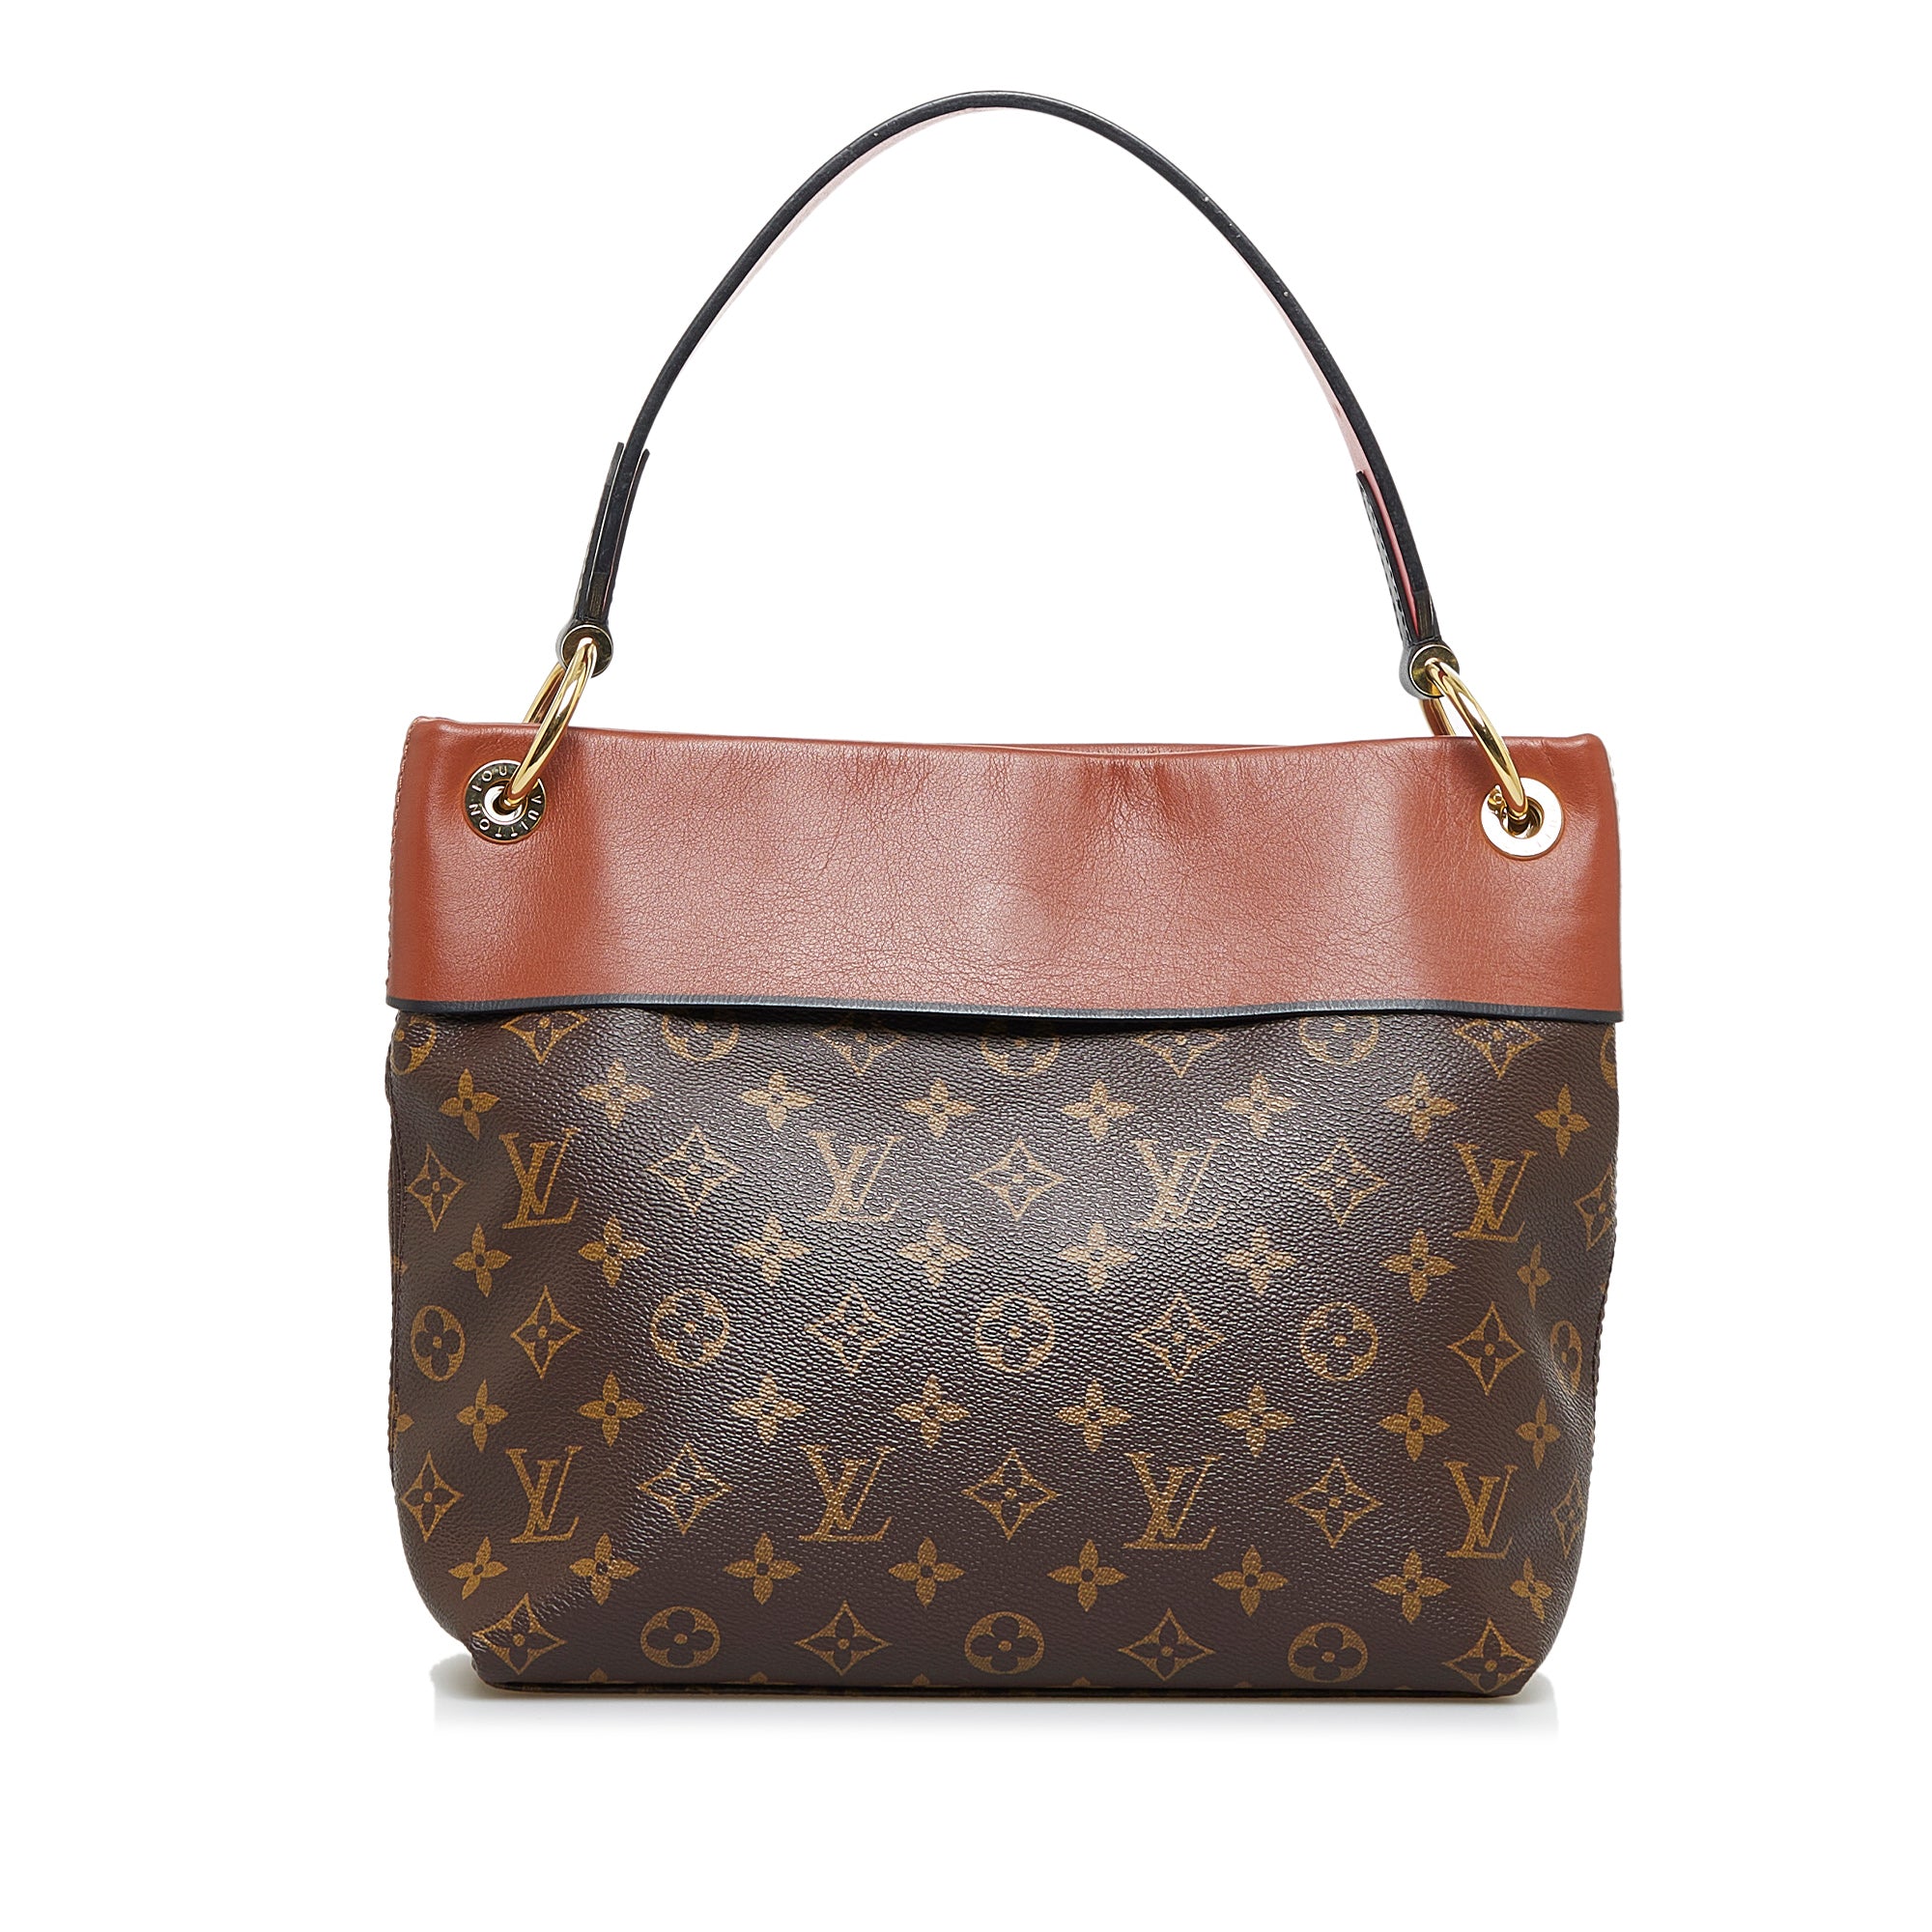 Authentic Louis Vuitton Tuileries Hobo Monogram Canvas with Leather Brown